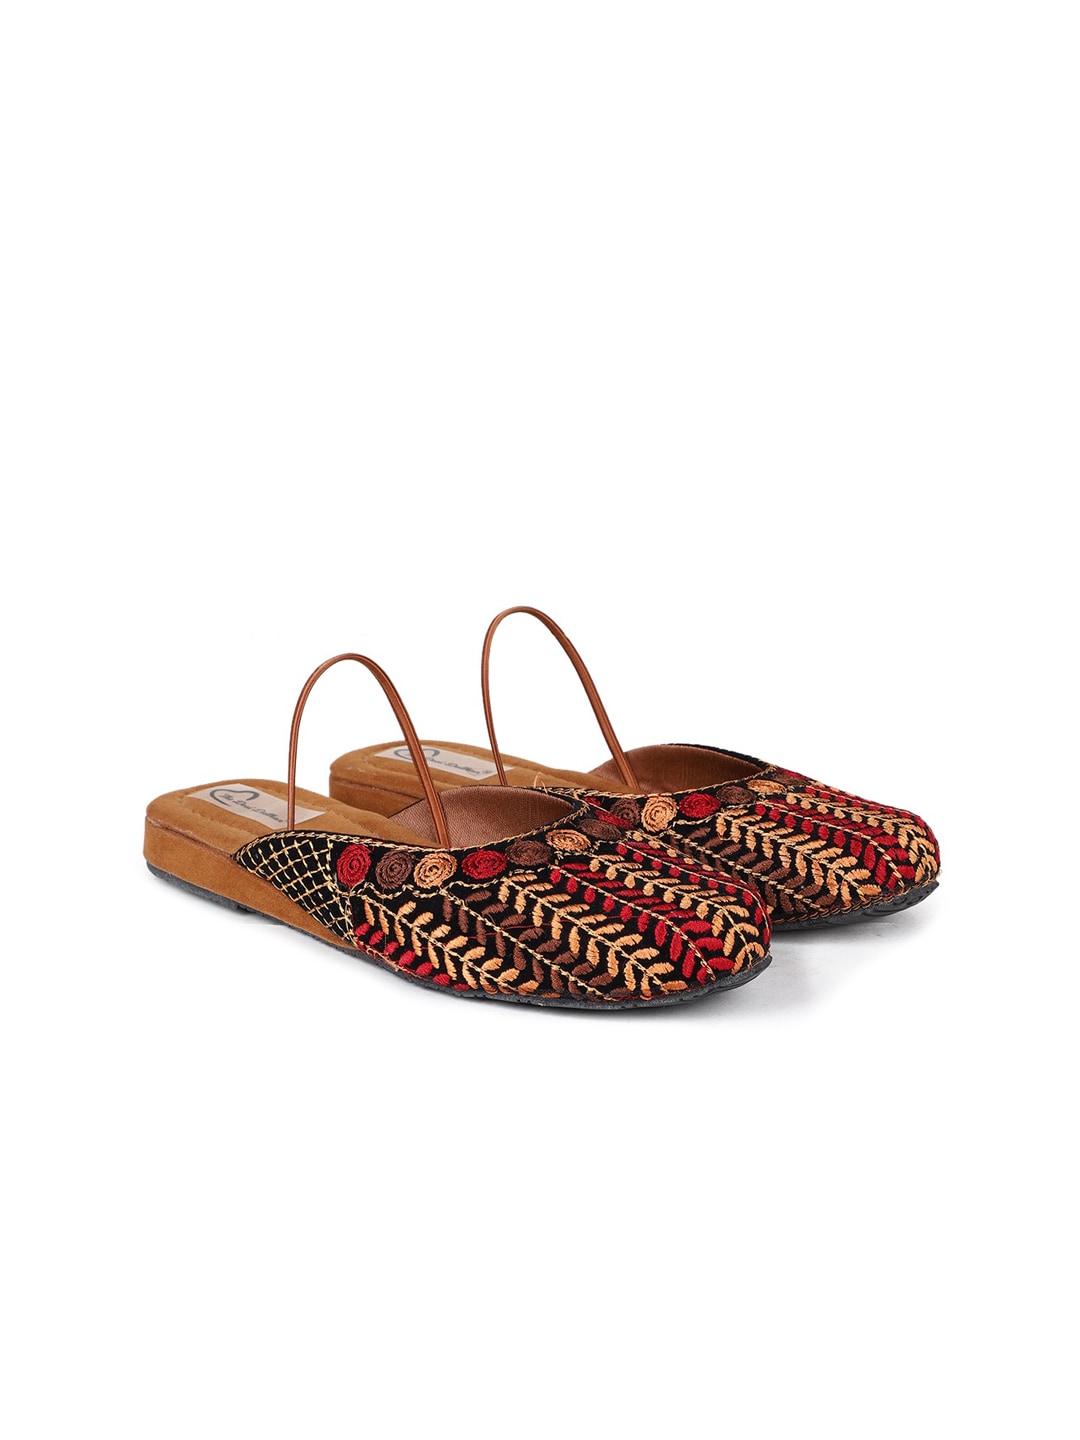 The Desi Dulhan Women Embroidered Ethnic Mules Flats Price in India